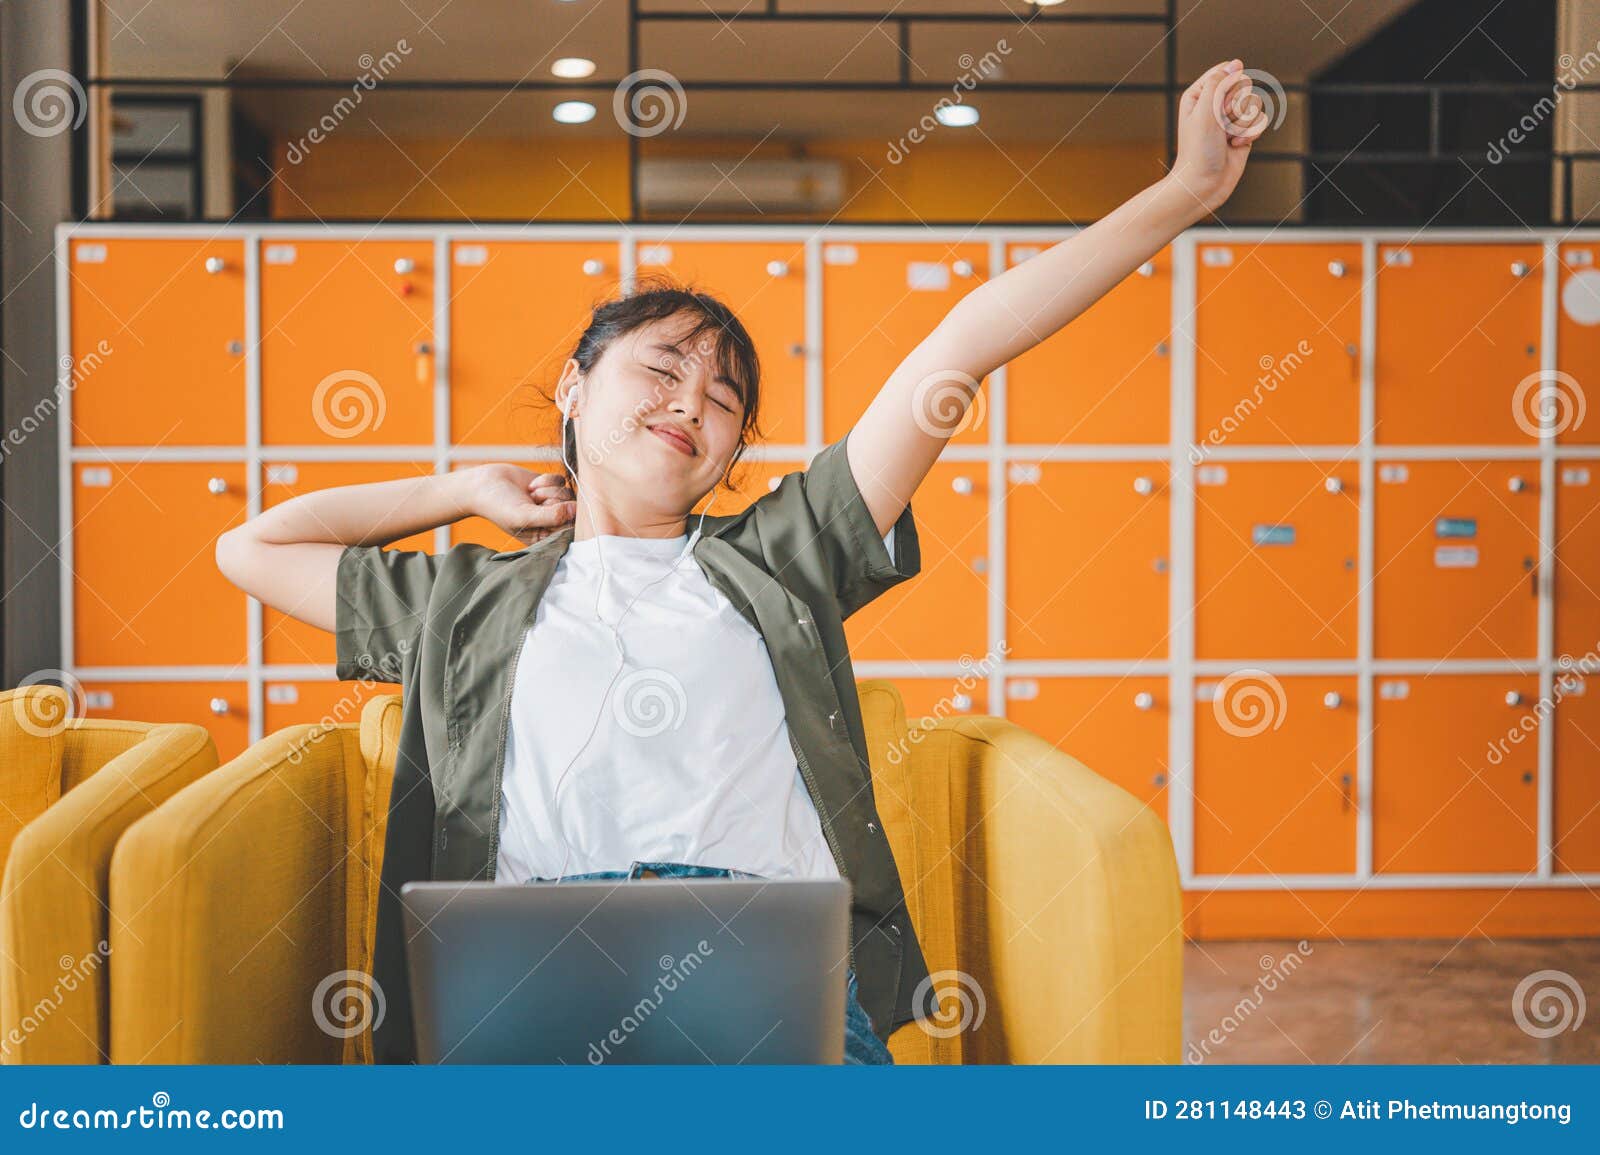 young asian freelancers are stretching oneself and relaxing after working and planning to work while working on laptop in the cafe